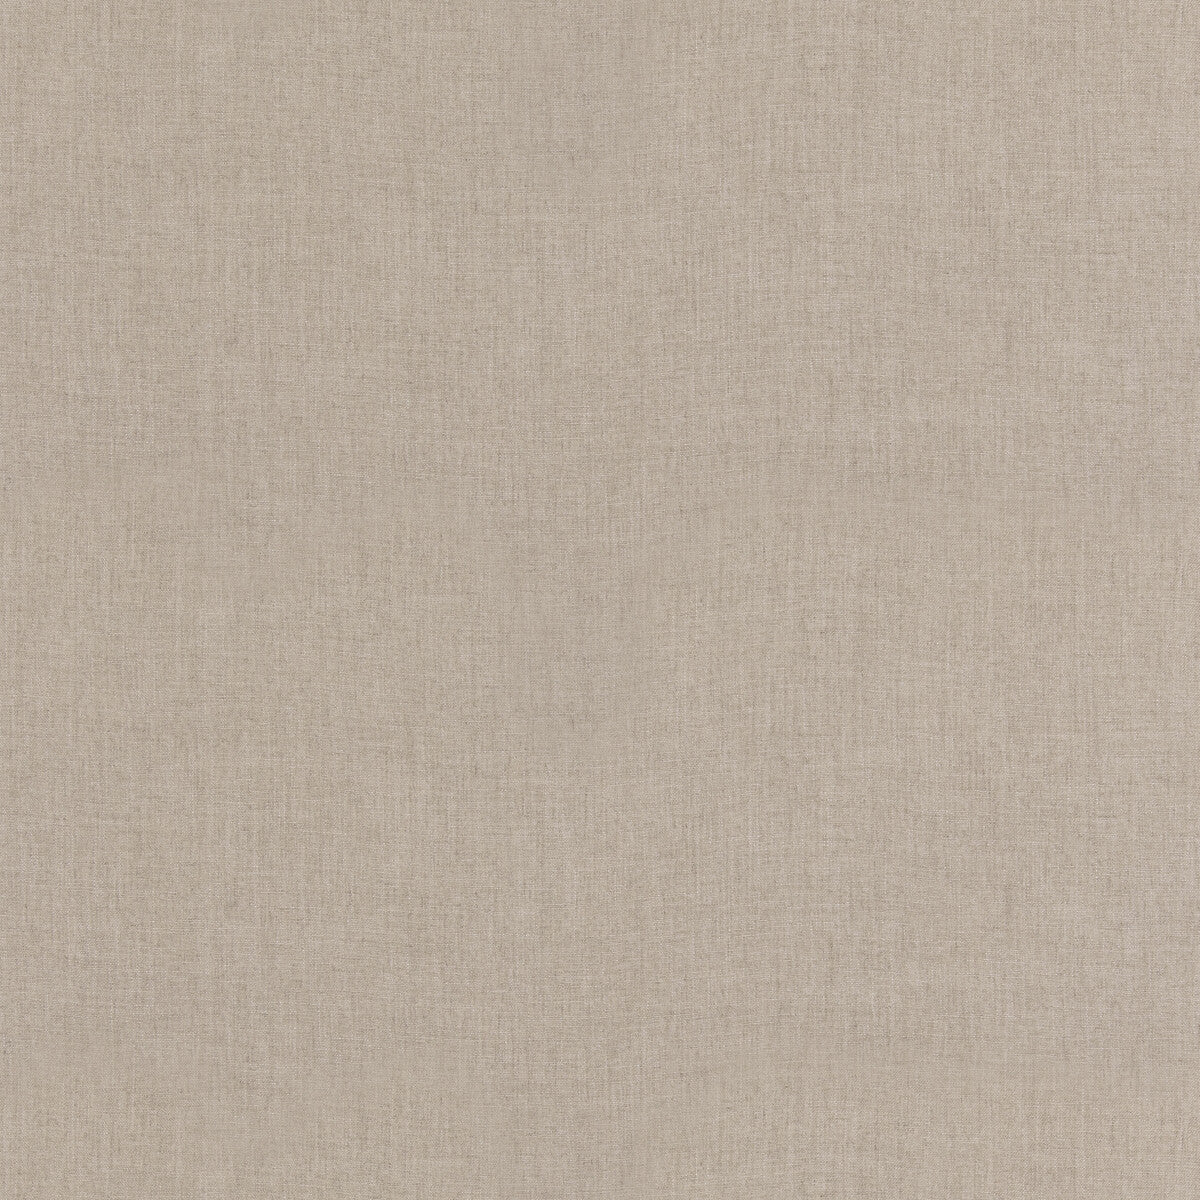 Jura fabric in parchment color - pattern ED85370.225.0 - by Threads in the Quintessential Textures collection